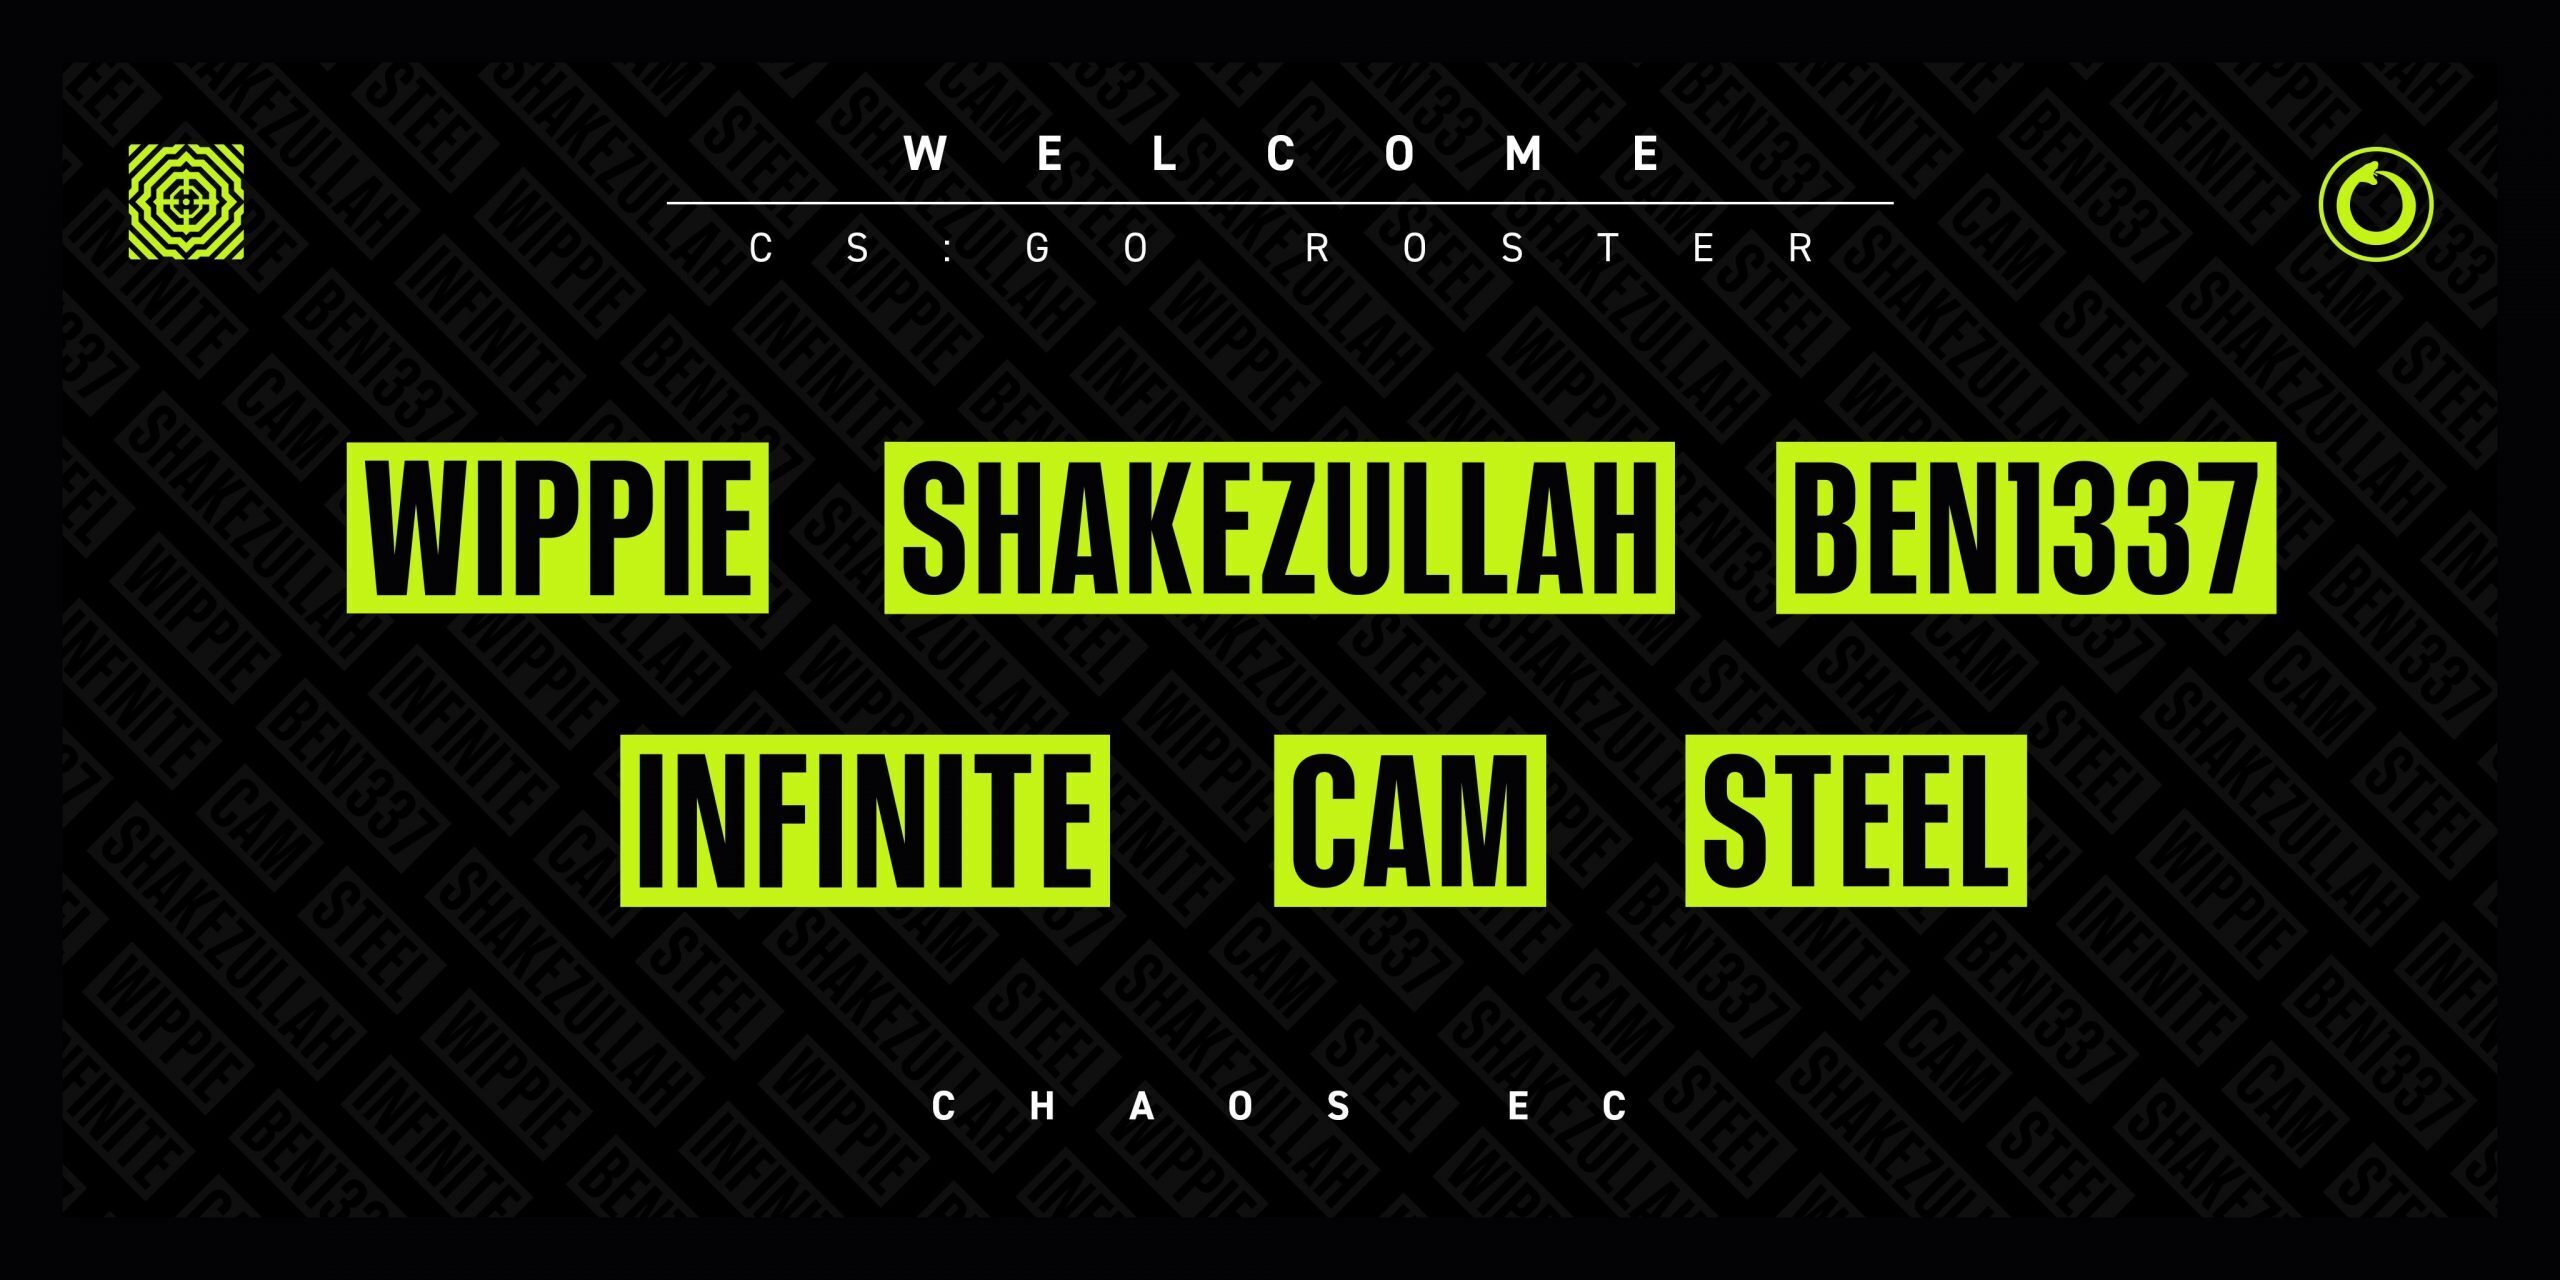 Chaos EC's new squad is made from the core of the former Team Singularity roster that was released in early October (Image via Chaos EC/Twitter)